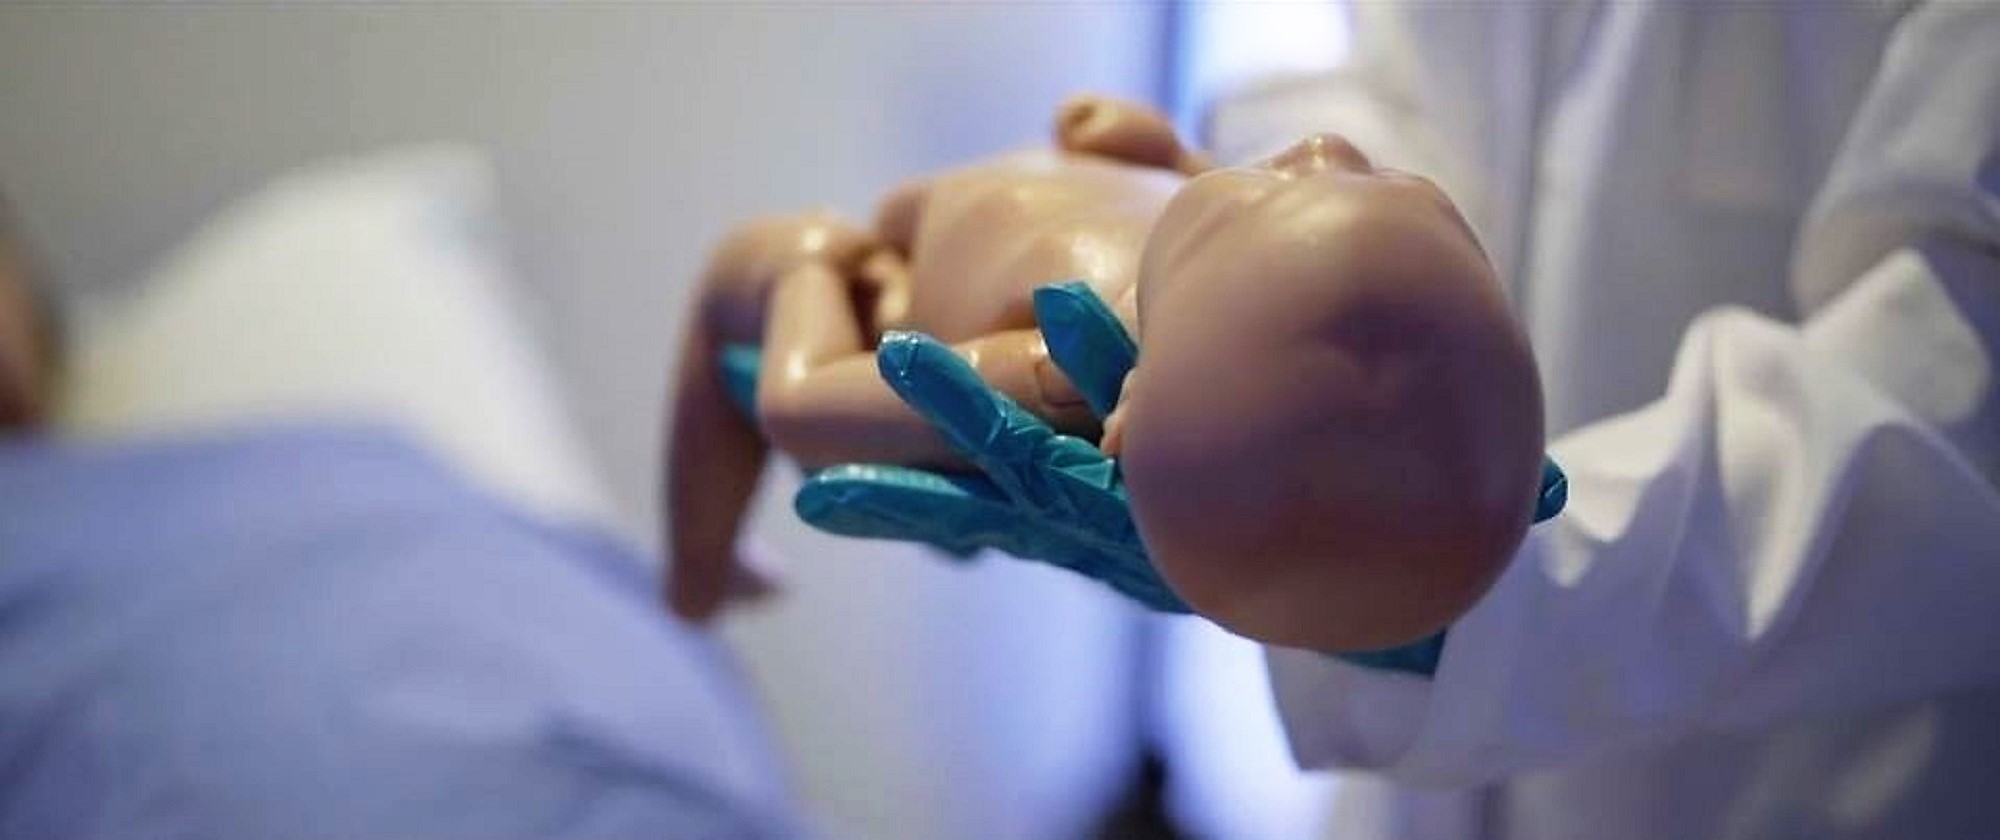 LucinaAR – The First Childbirth Simulator Built On Augmented